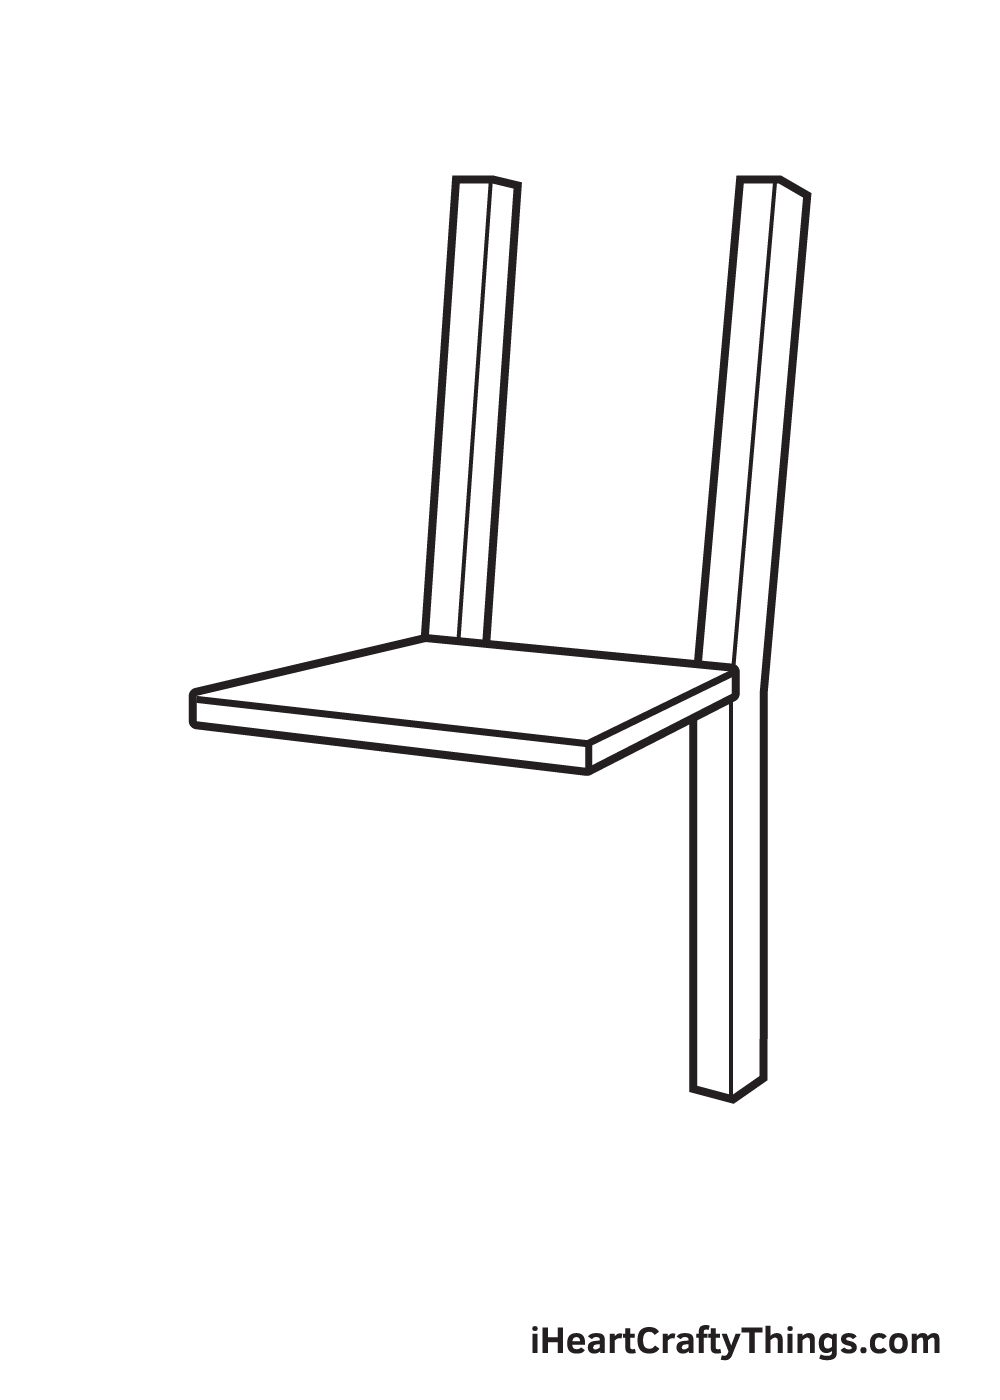 Drawing a chair - Step 3